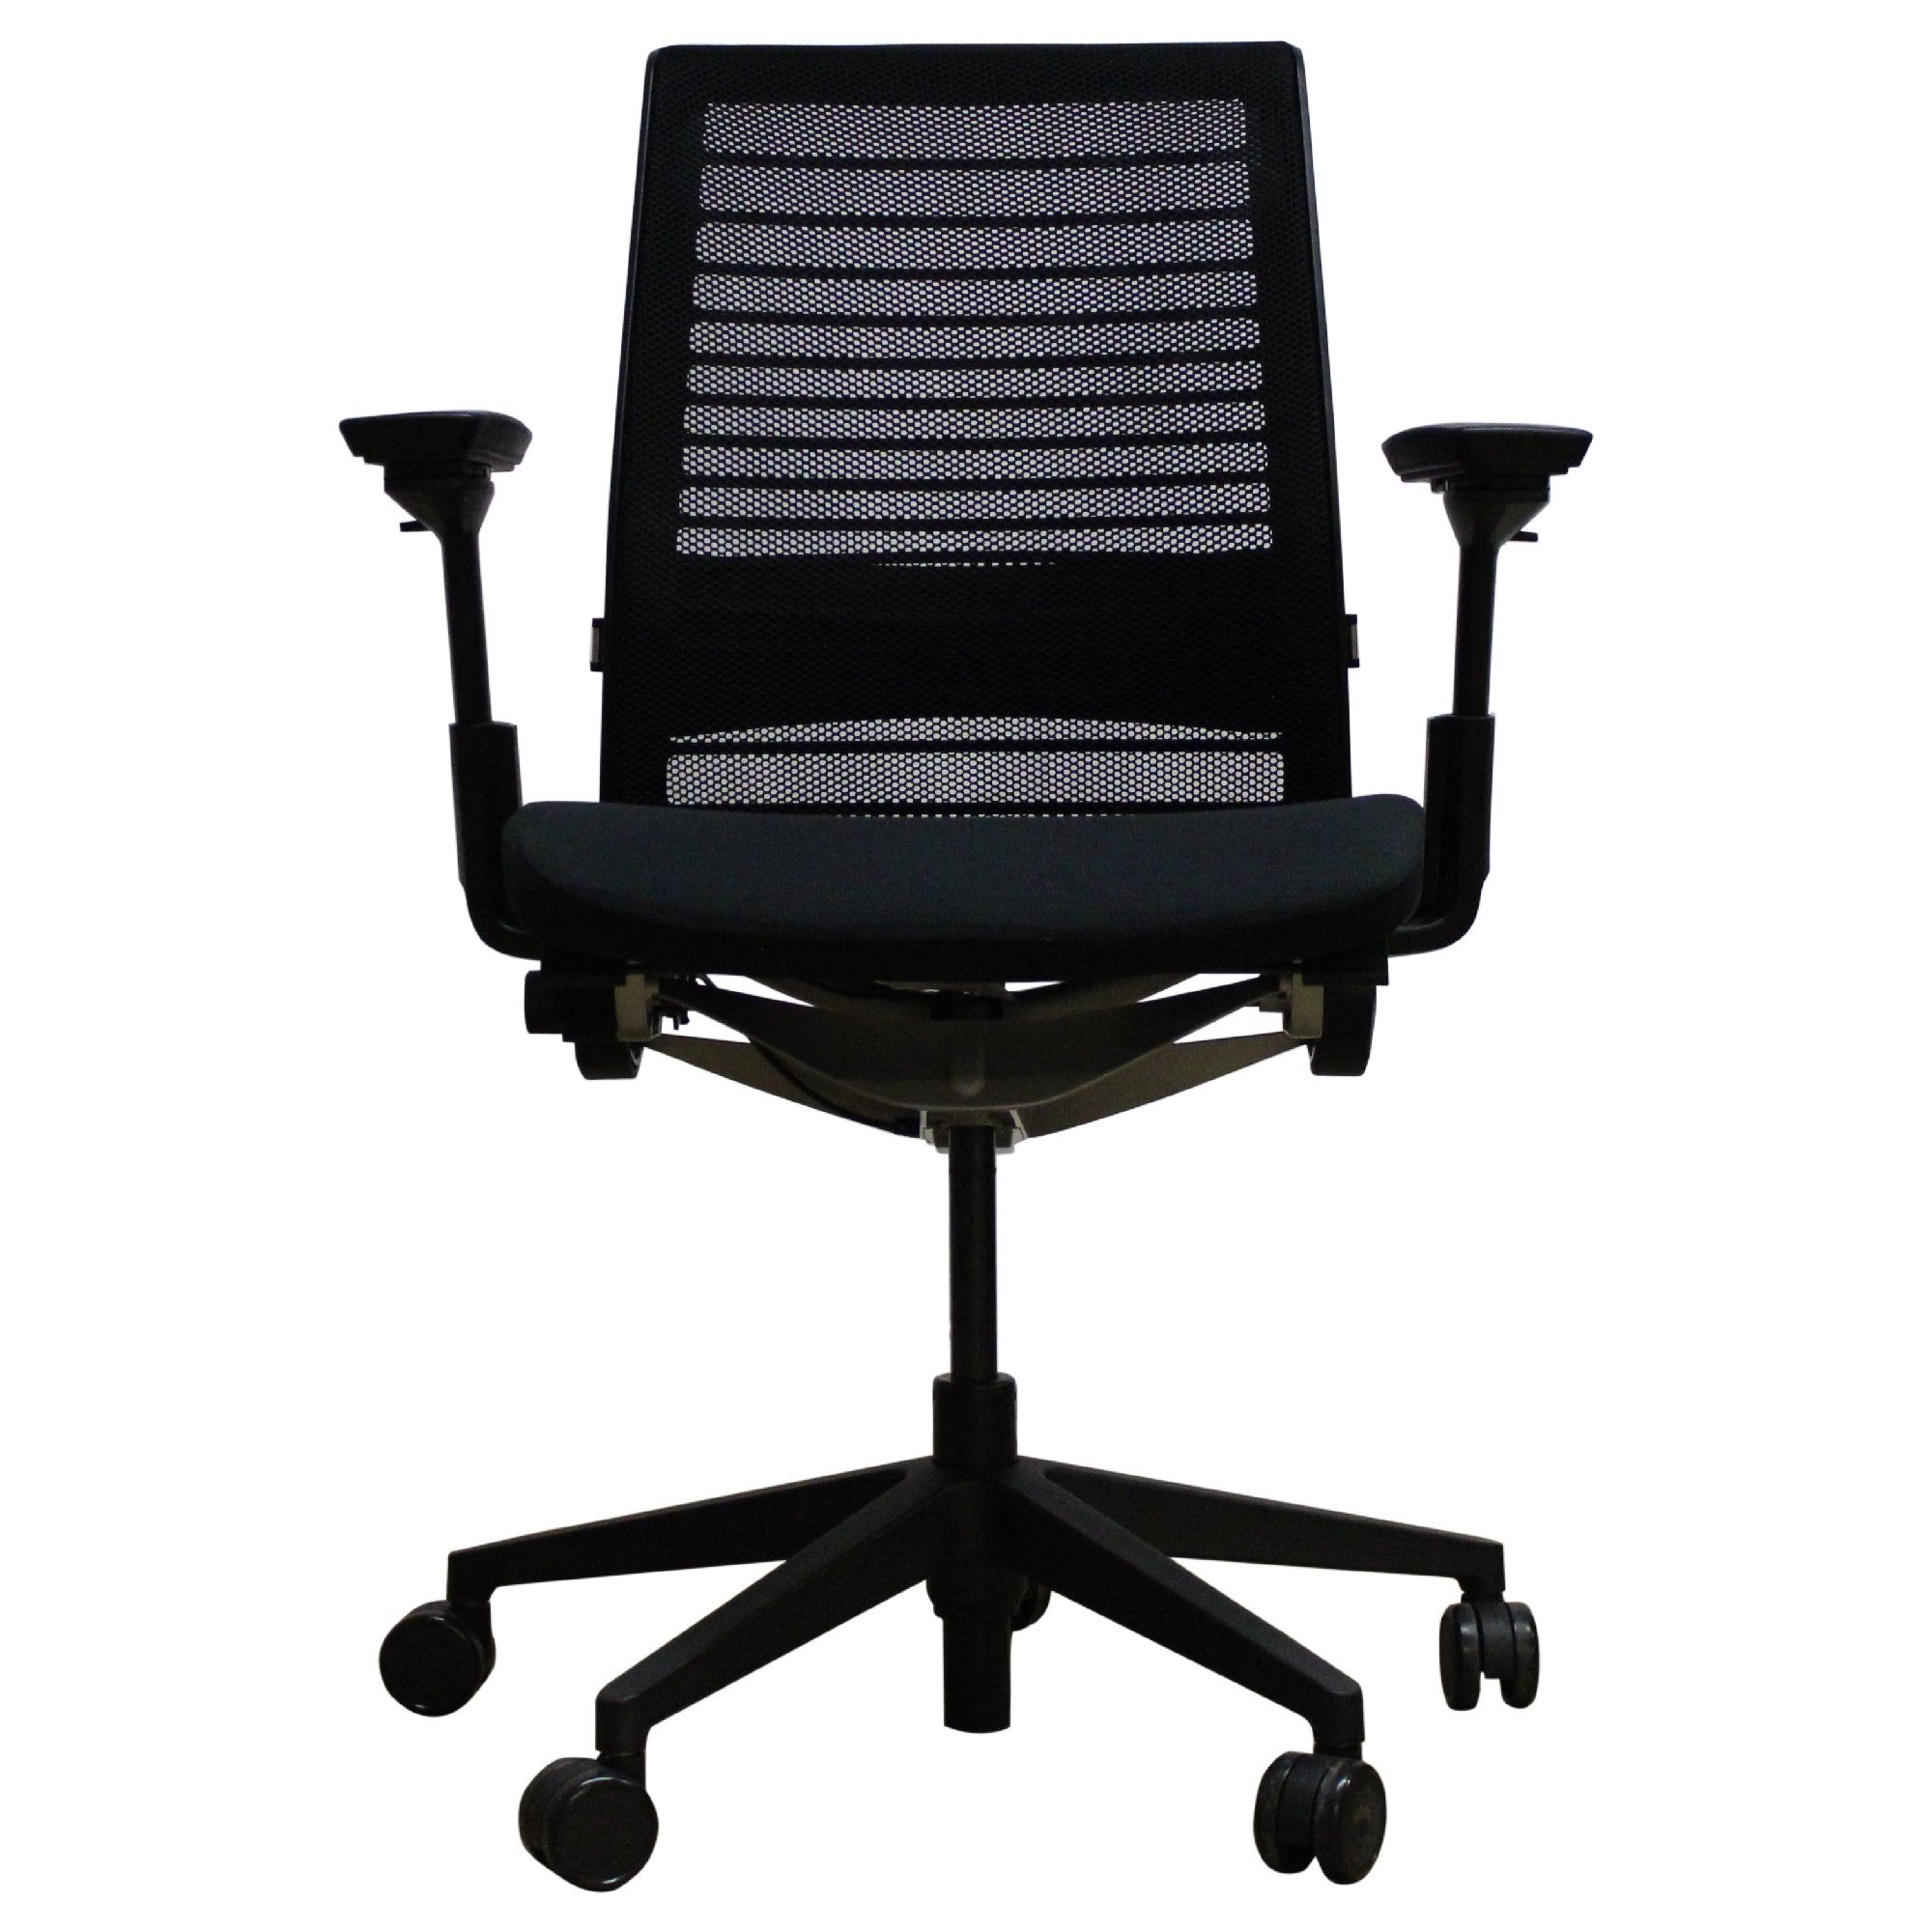 Steelcase Think V2 Task Chair - Black - Preowned